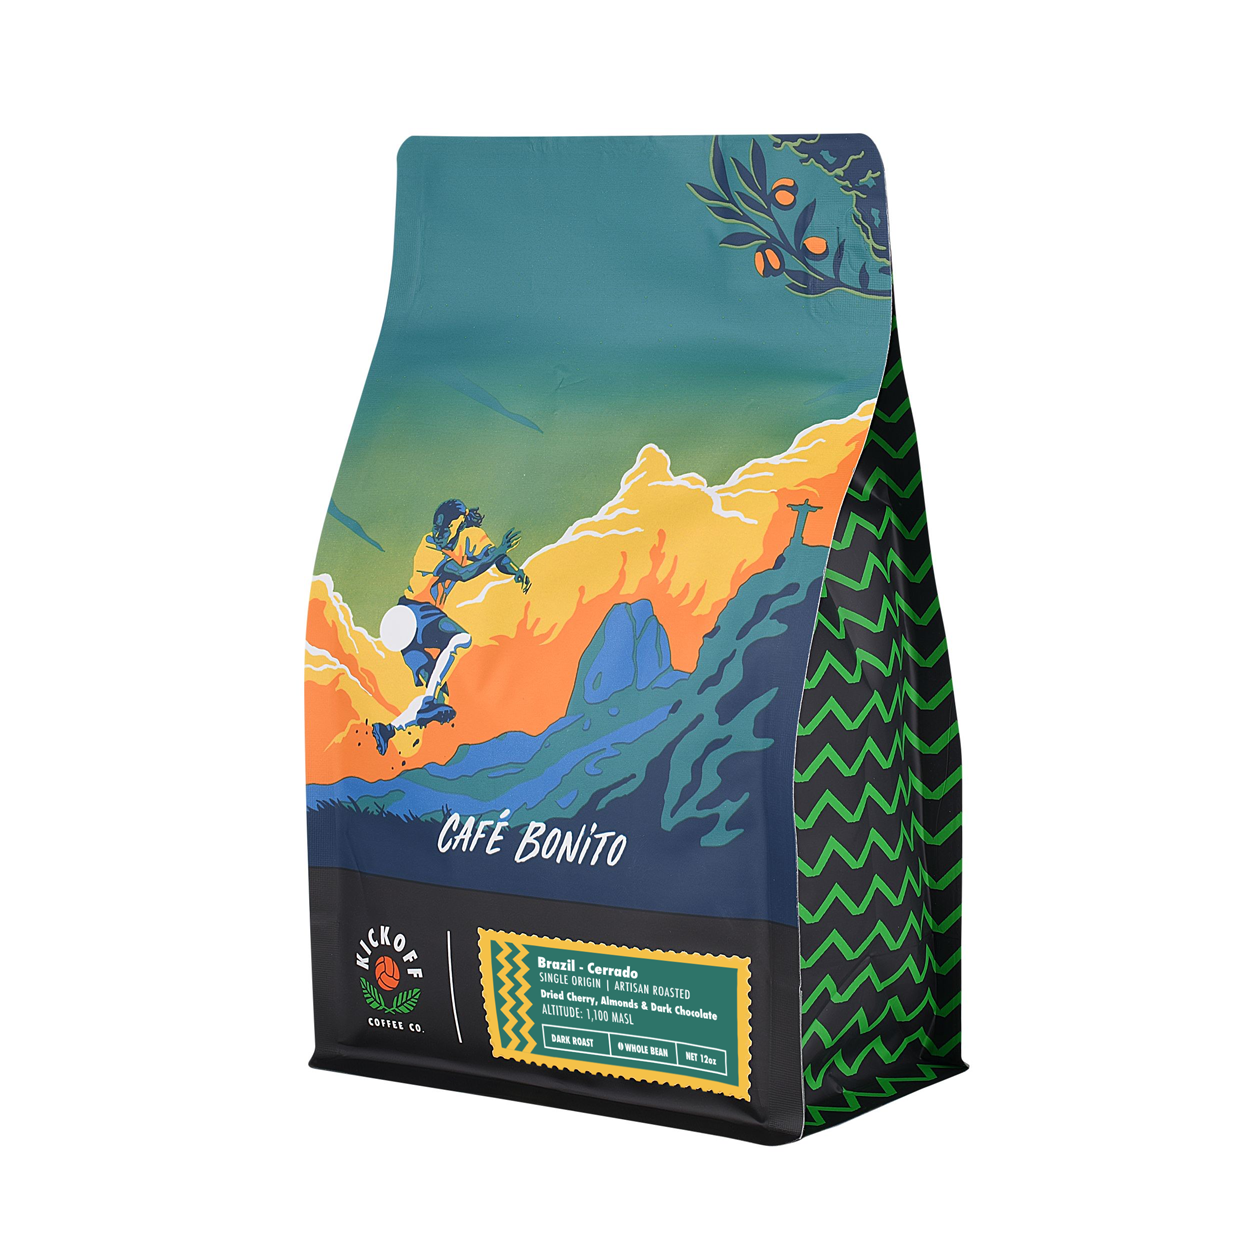 Cafe Bonito Coffee Bag | Kickoff Coffee Co | Brazil coffee| Soccer Coffee | Coffee for Soccer People by Soccer People | Premier League Morning Coffee #myplmorning | specialty coffee that gives back